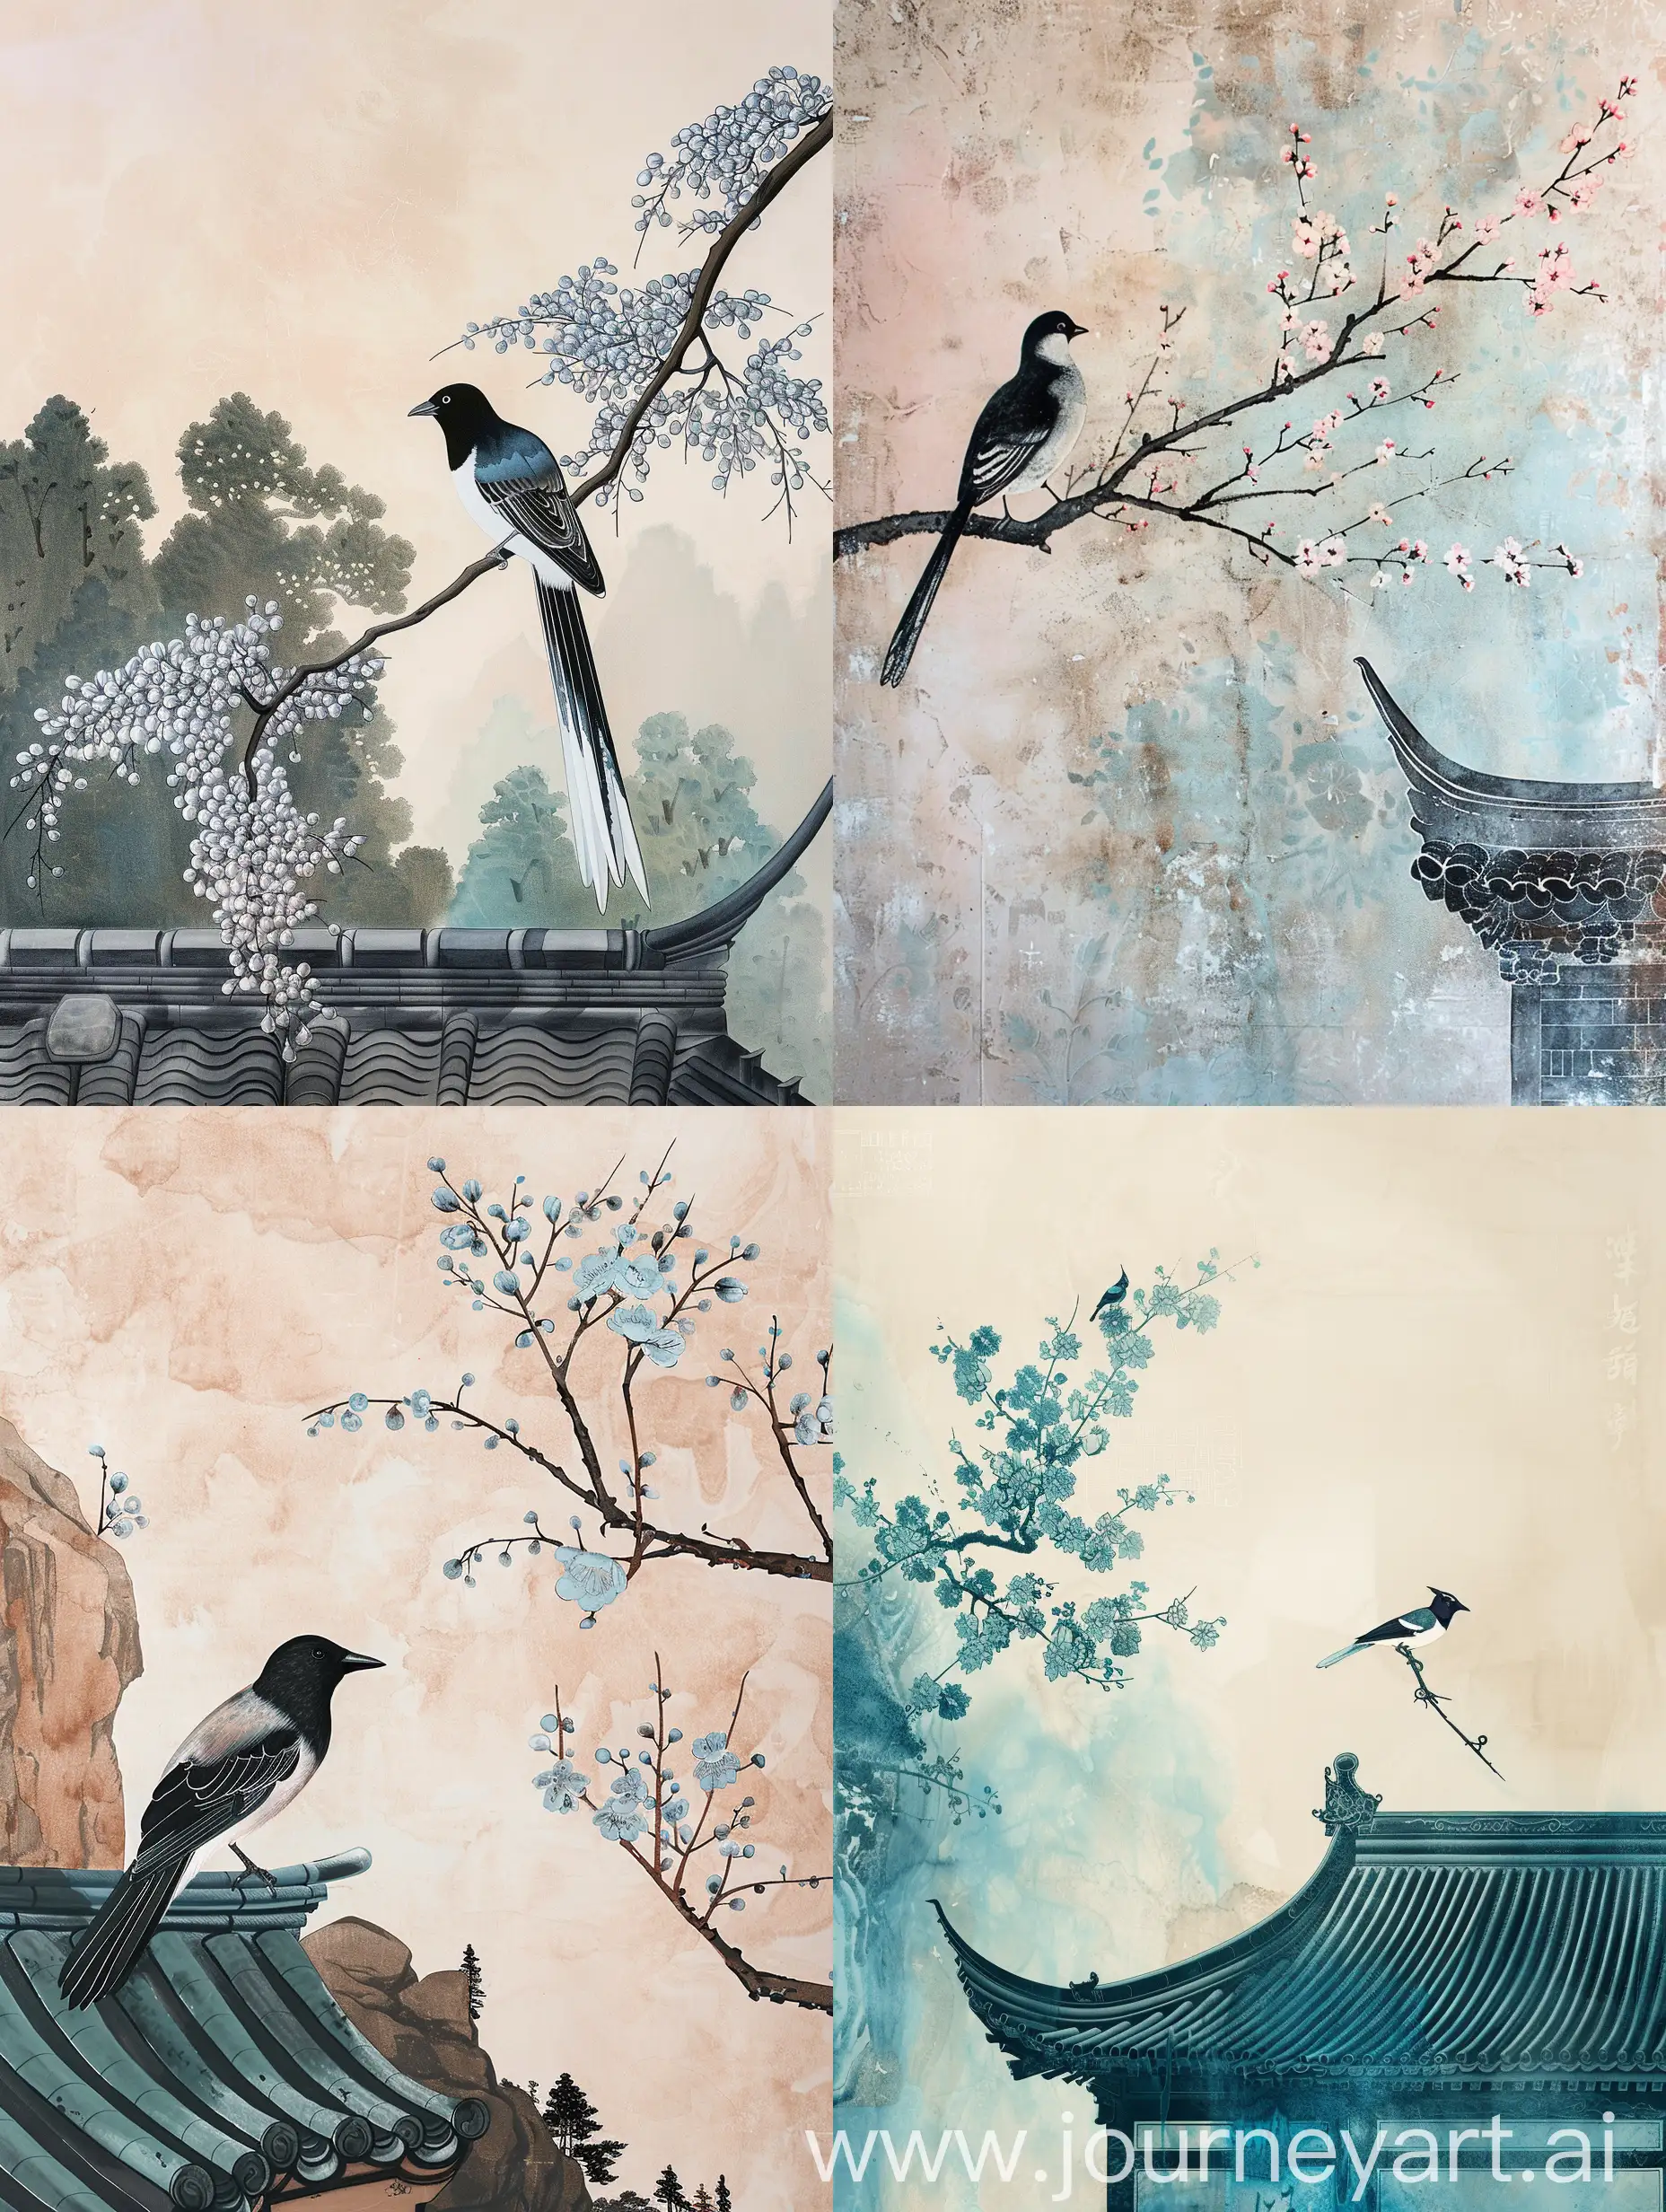 Song Dynasty Mural , Heian Period, Zen, Cyan Light Beige style, Chinese eaves,  magpie
Historical painting, ultra-fine Details, Meticulous Style, New Chinese Style, landscape painting, Symmetrical composition